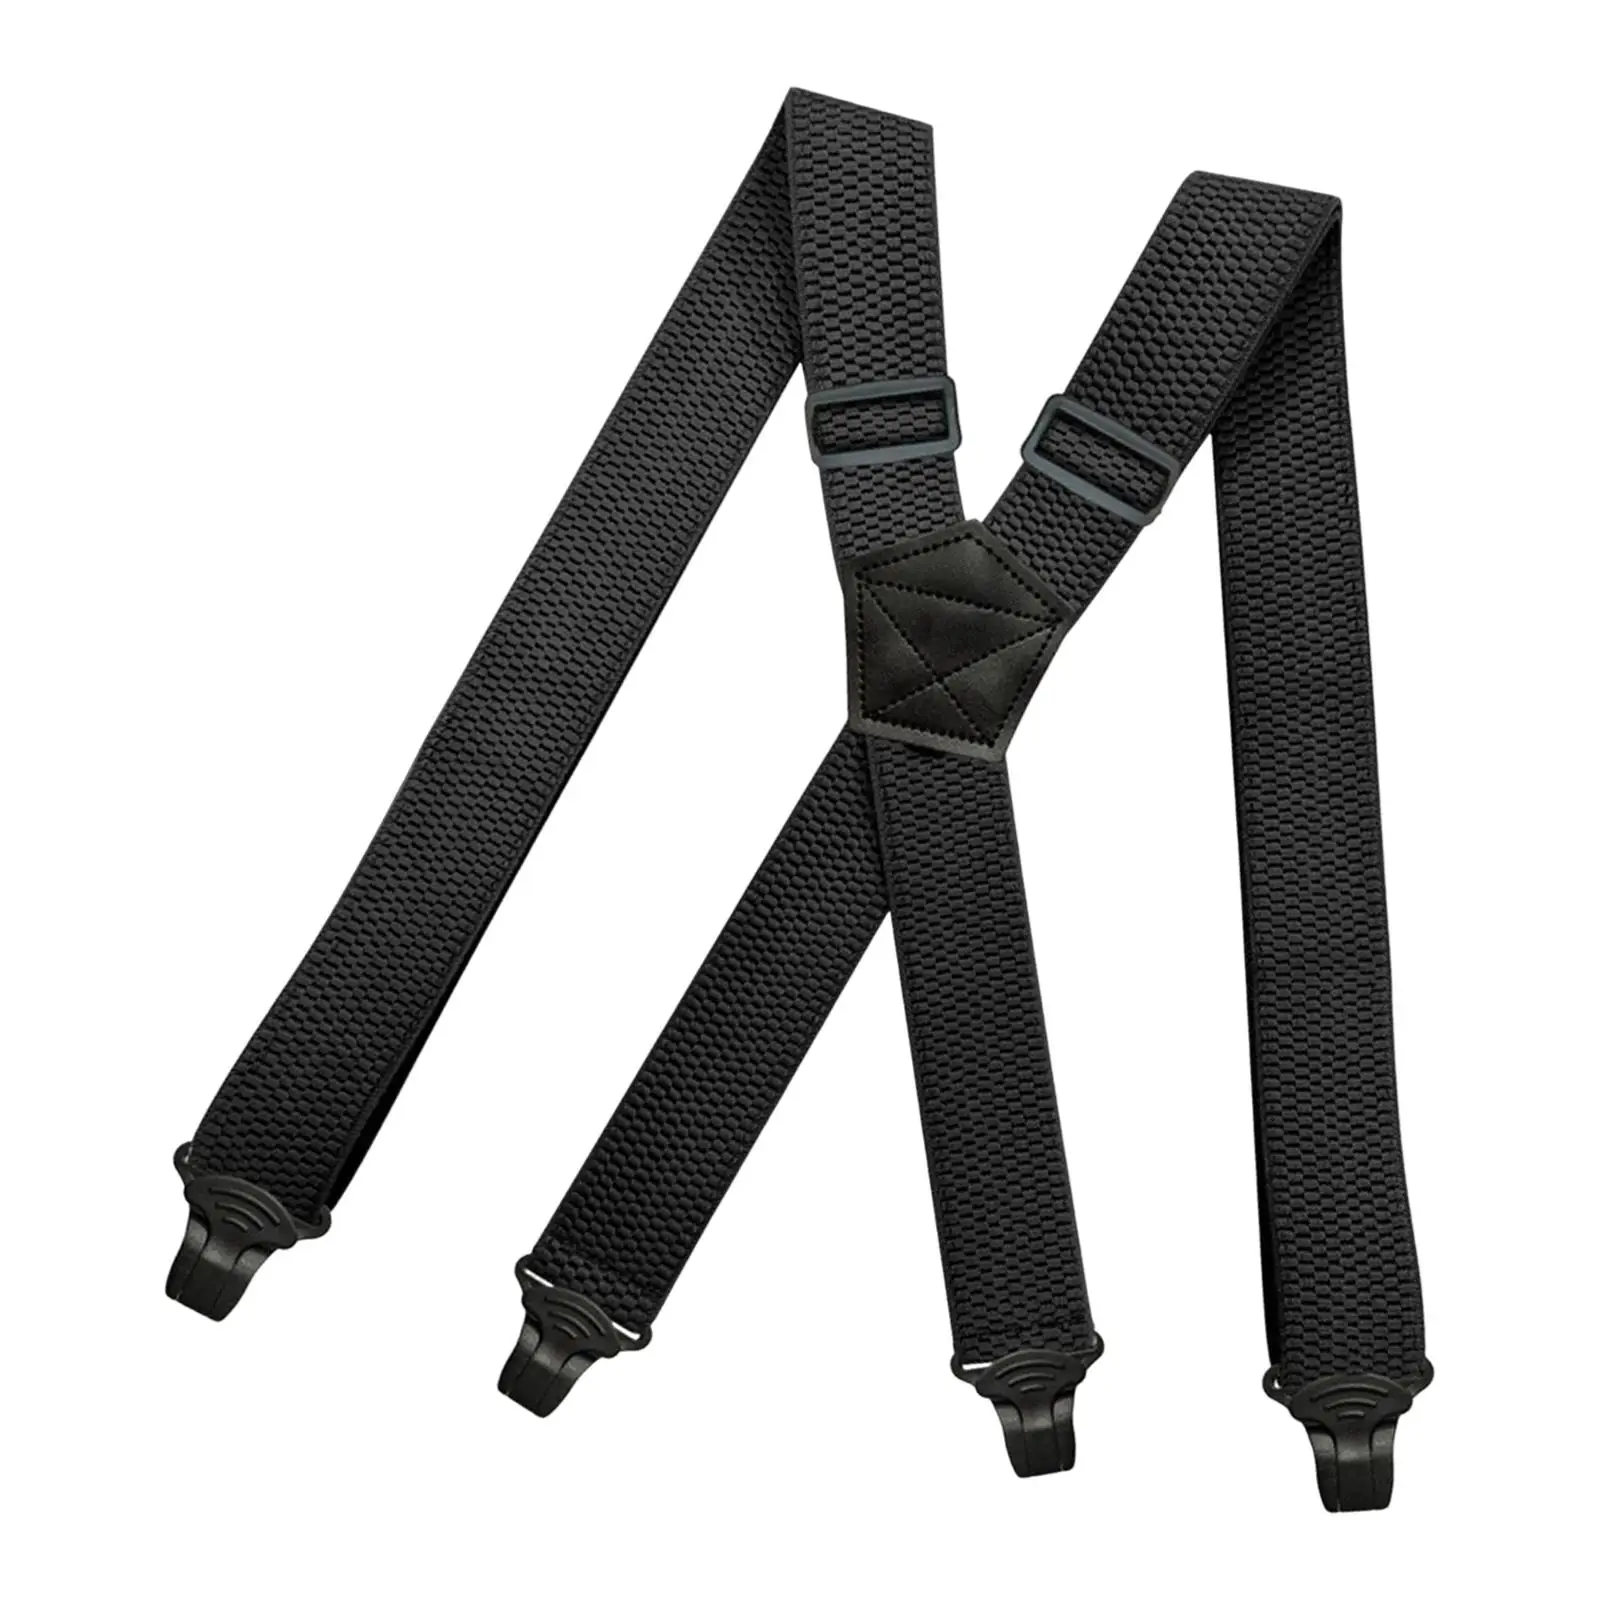 Mens Womens Suspender Elastic Straps Adults x Shaped 4 Clips Suspenders Trucker Style Suspenders Clothes Accessories Supplies